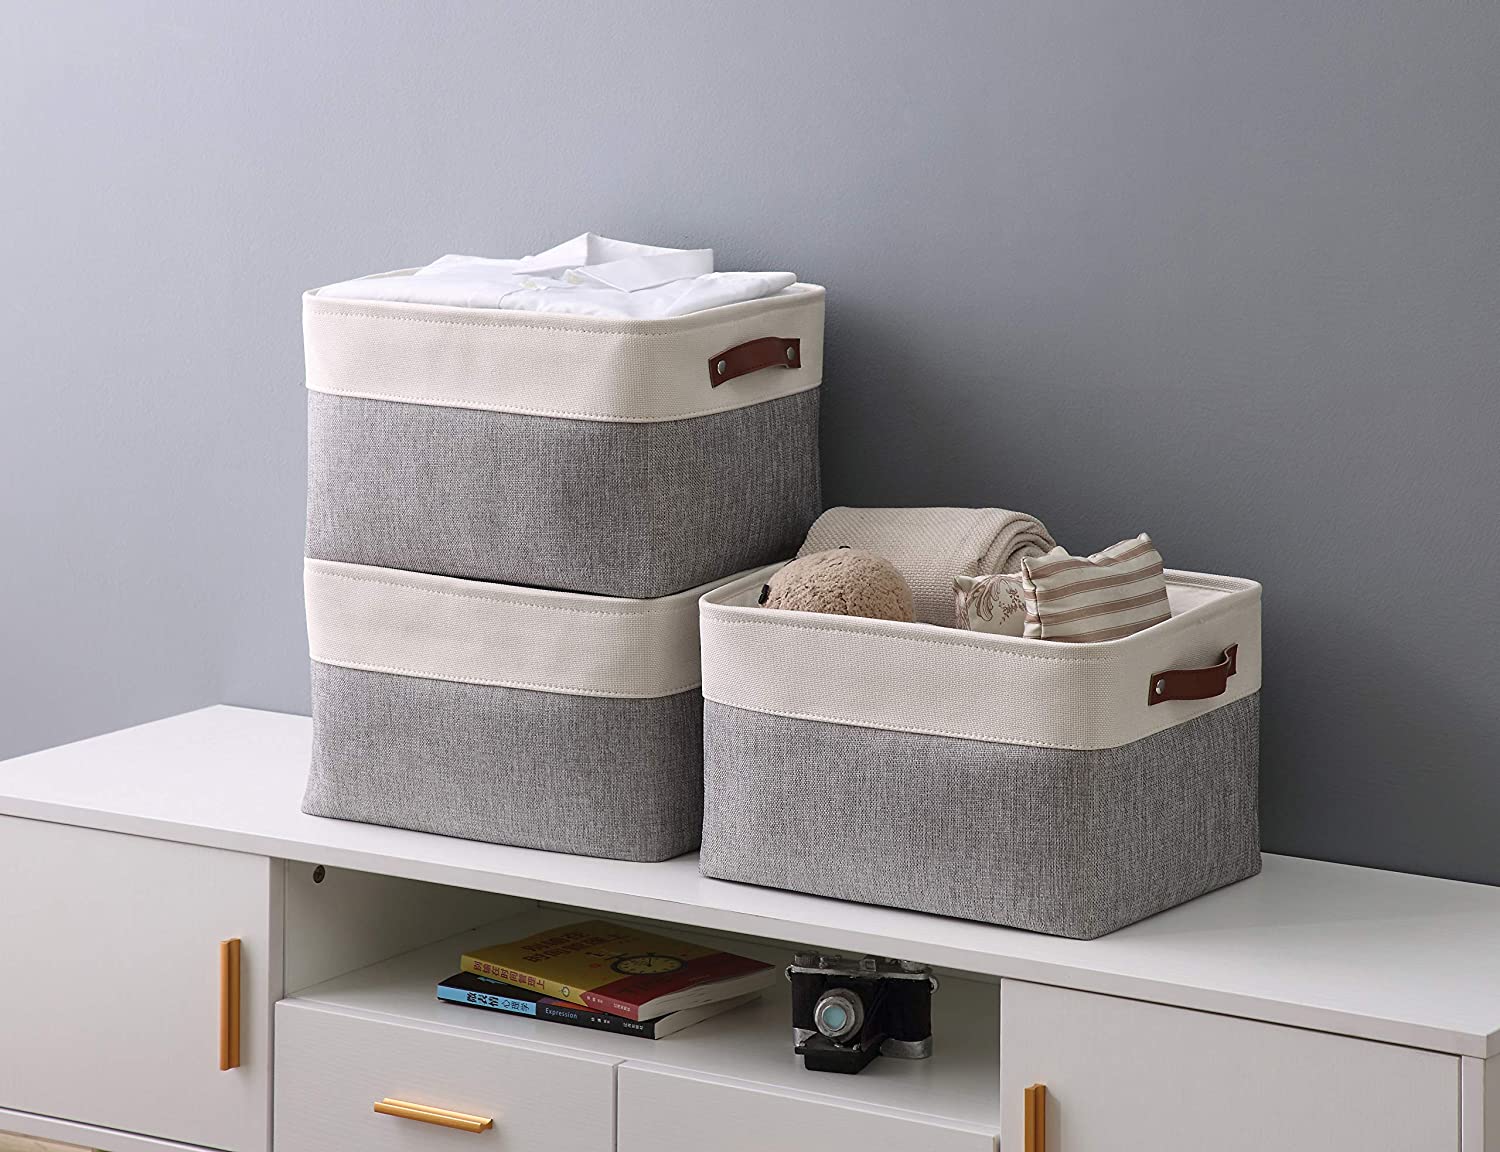 Medium Plain Wooden Storage Chest Box With Removable Compartments Lid & Handles 